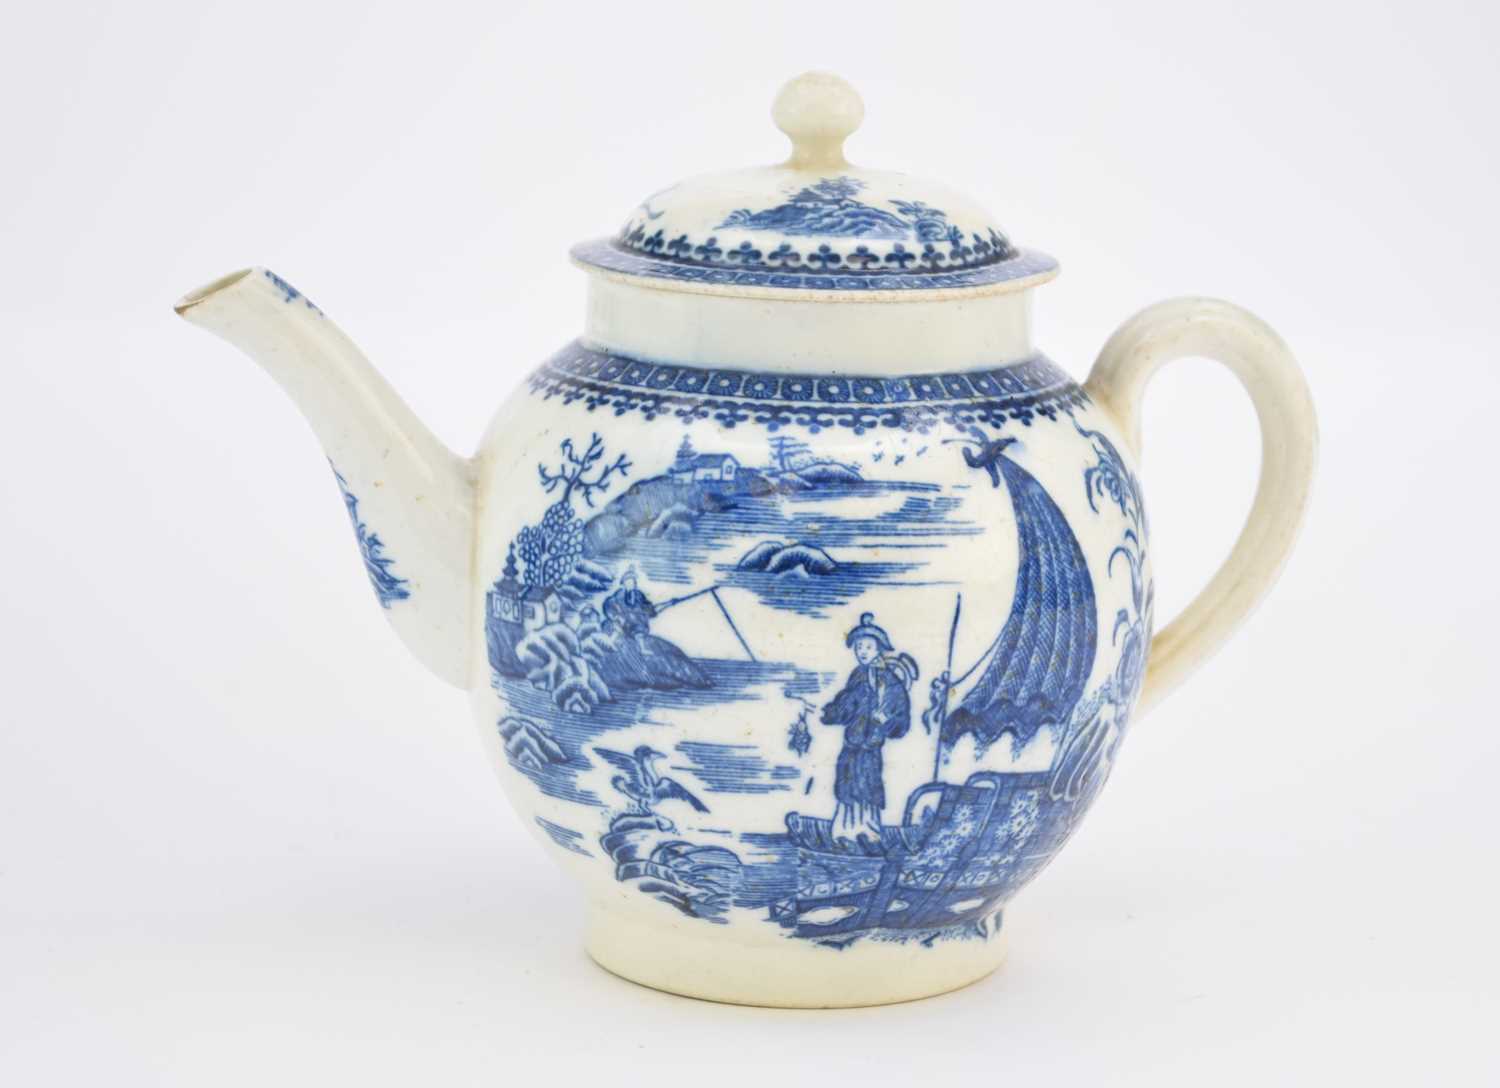 Lot 1 - Caughley 'Fisherman' teapot and cover, circa 1785-90